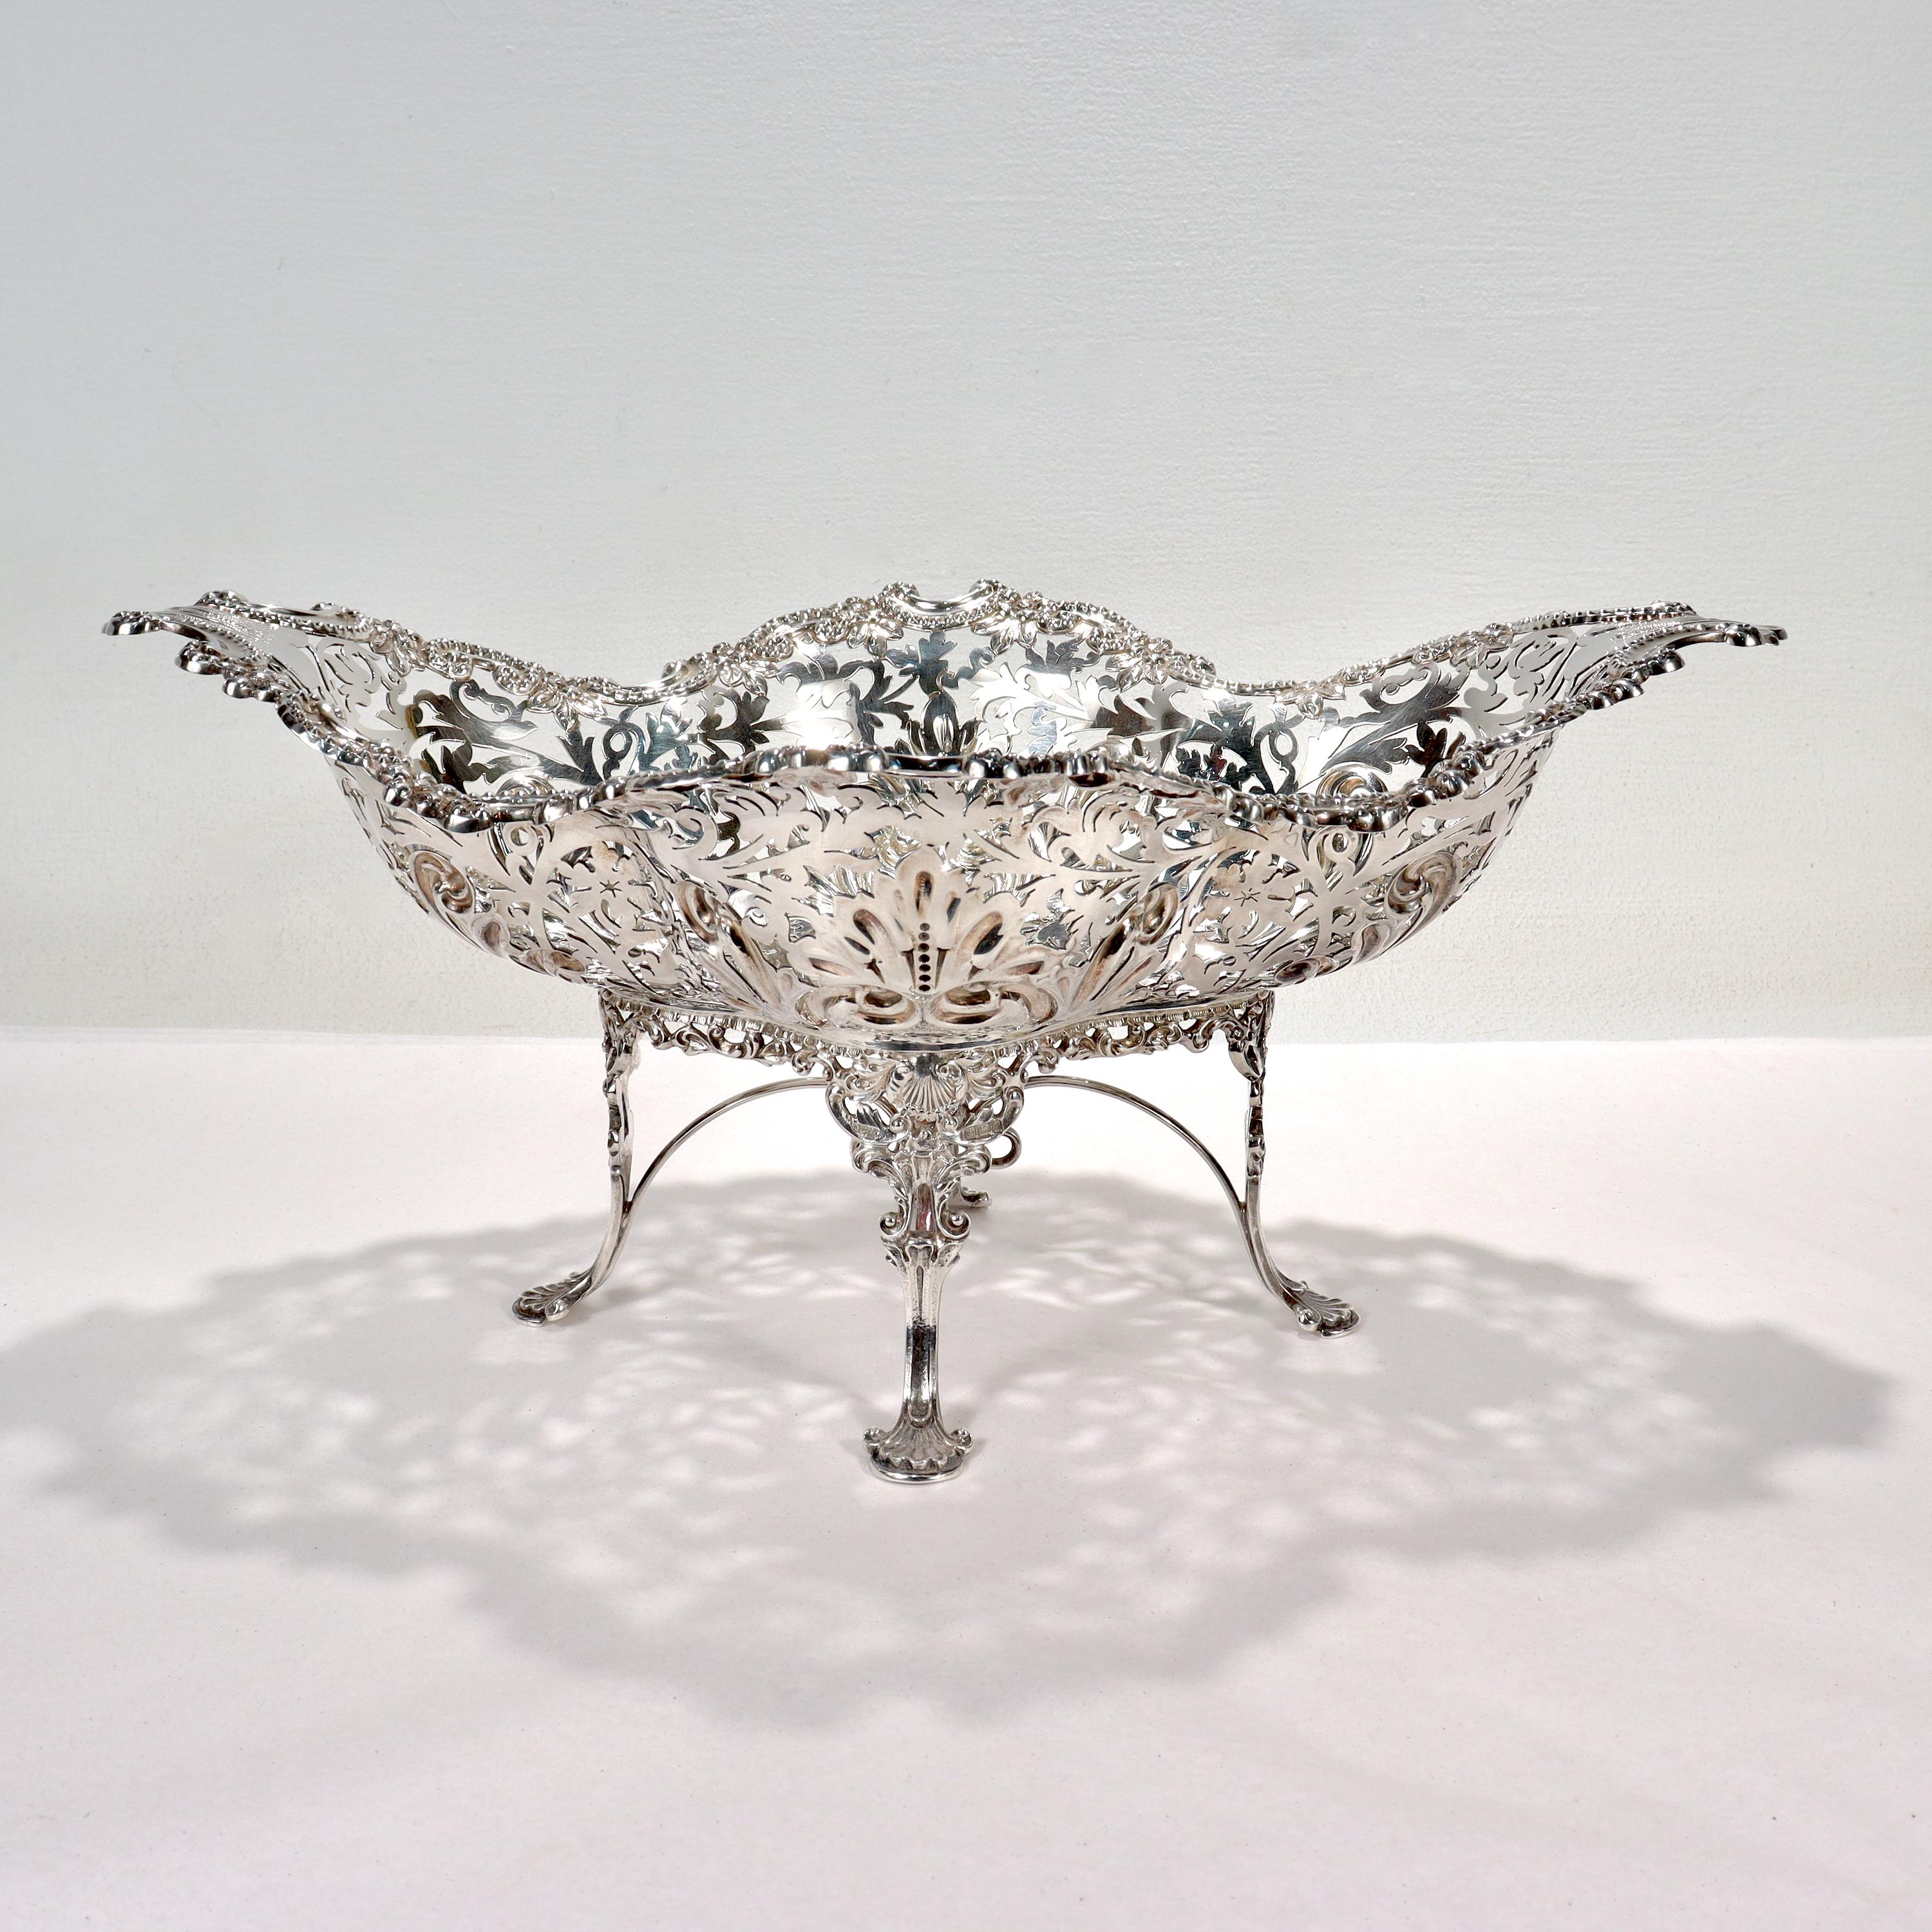 A fine large Georgian style reticulated footed basket.

In sterling silver.

By James Dixon & Sons of Birmingham, England.

The pierced bowl has a shaped rim and heart shaped devices in its interior and is supported by an ornate stand on cabriole